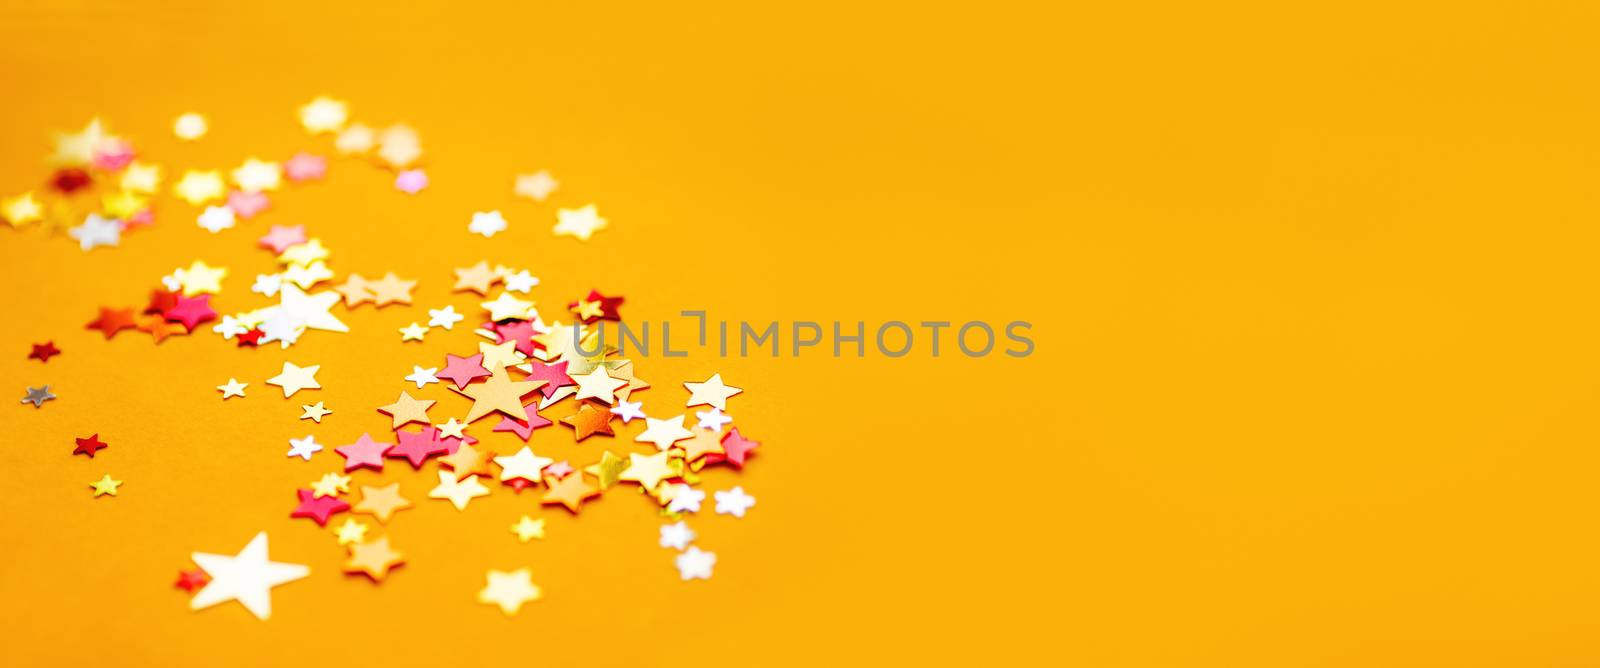 Yellow holiday background with colorful star confetti. Good background for Christmas and New Year cards.